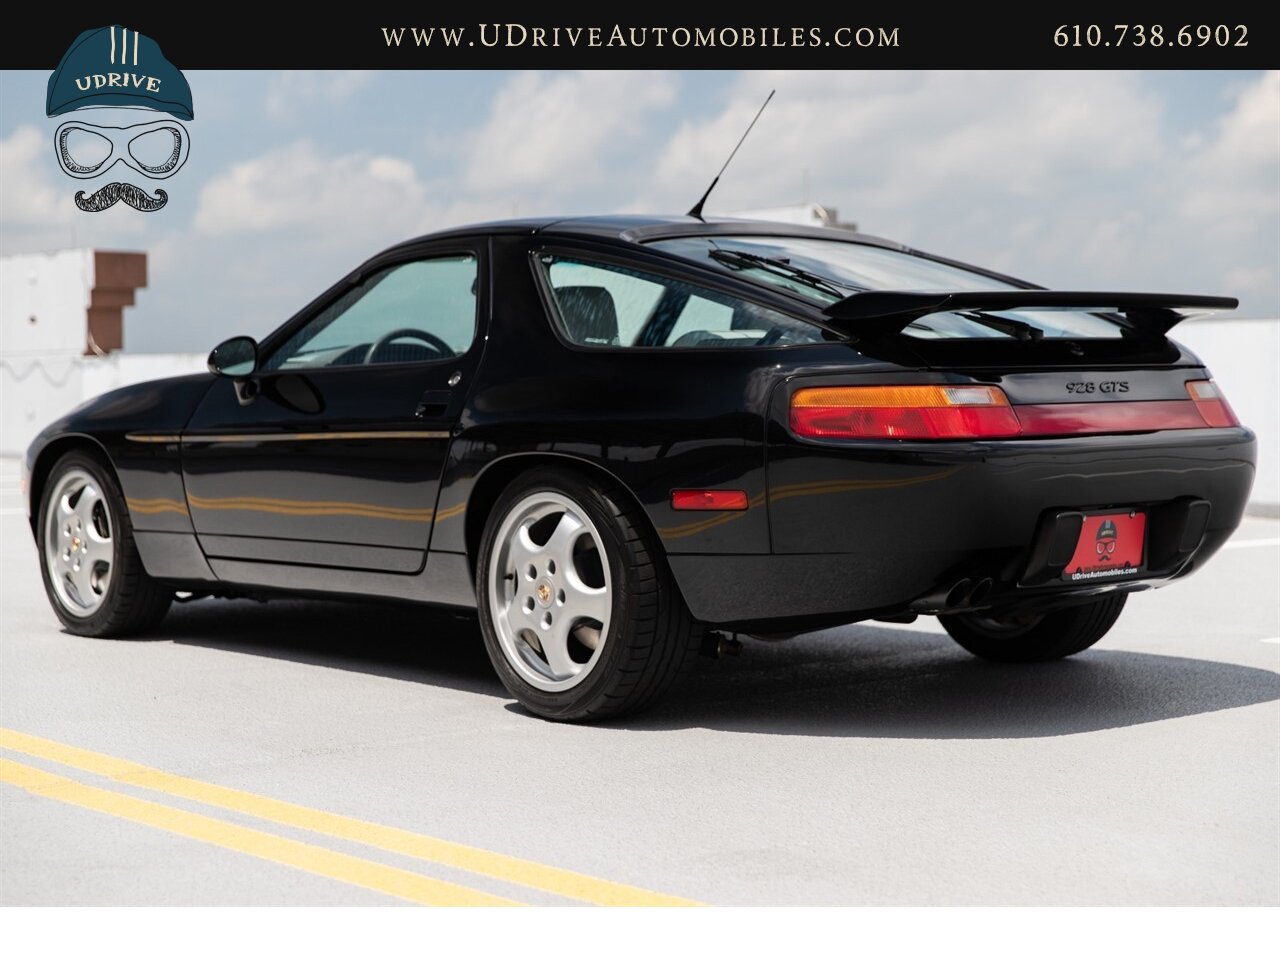 1993 Porsche 928 GTS Ultra Rare 5 Speed Service History  Collector Grade Example - Photo 21 - West Chester, PA 19382